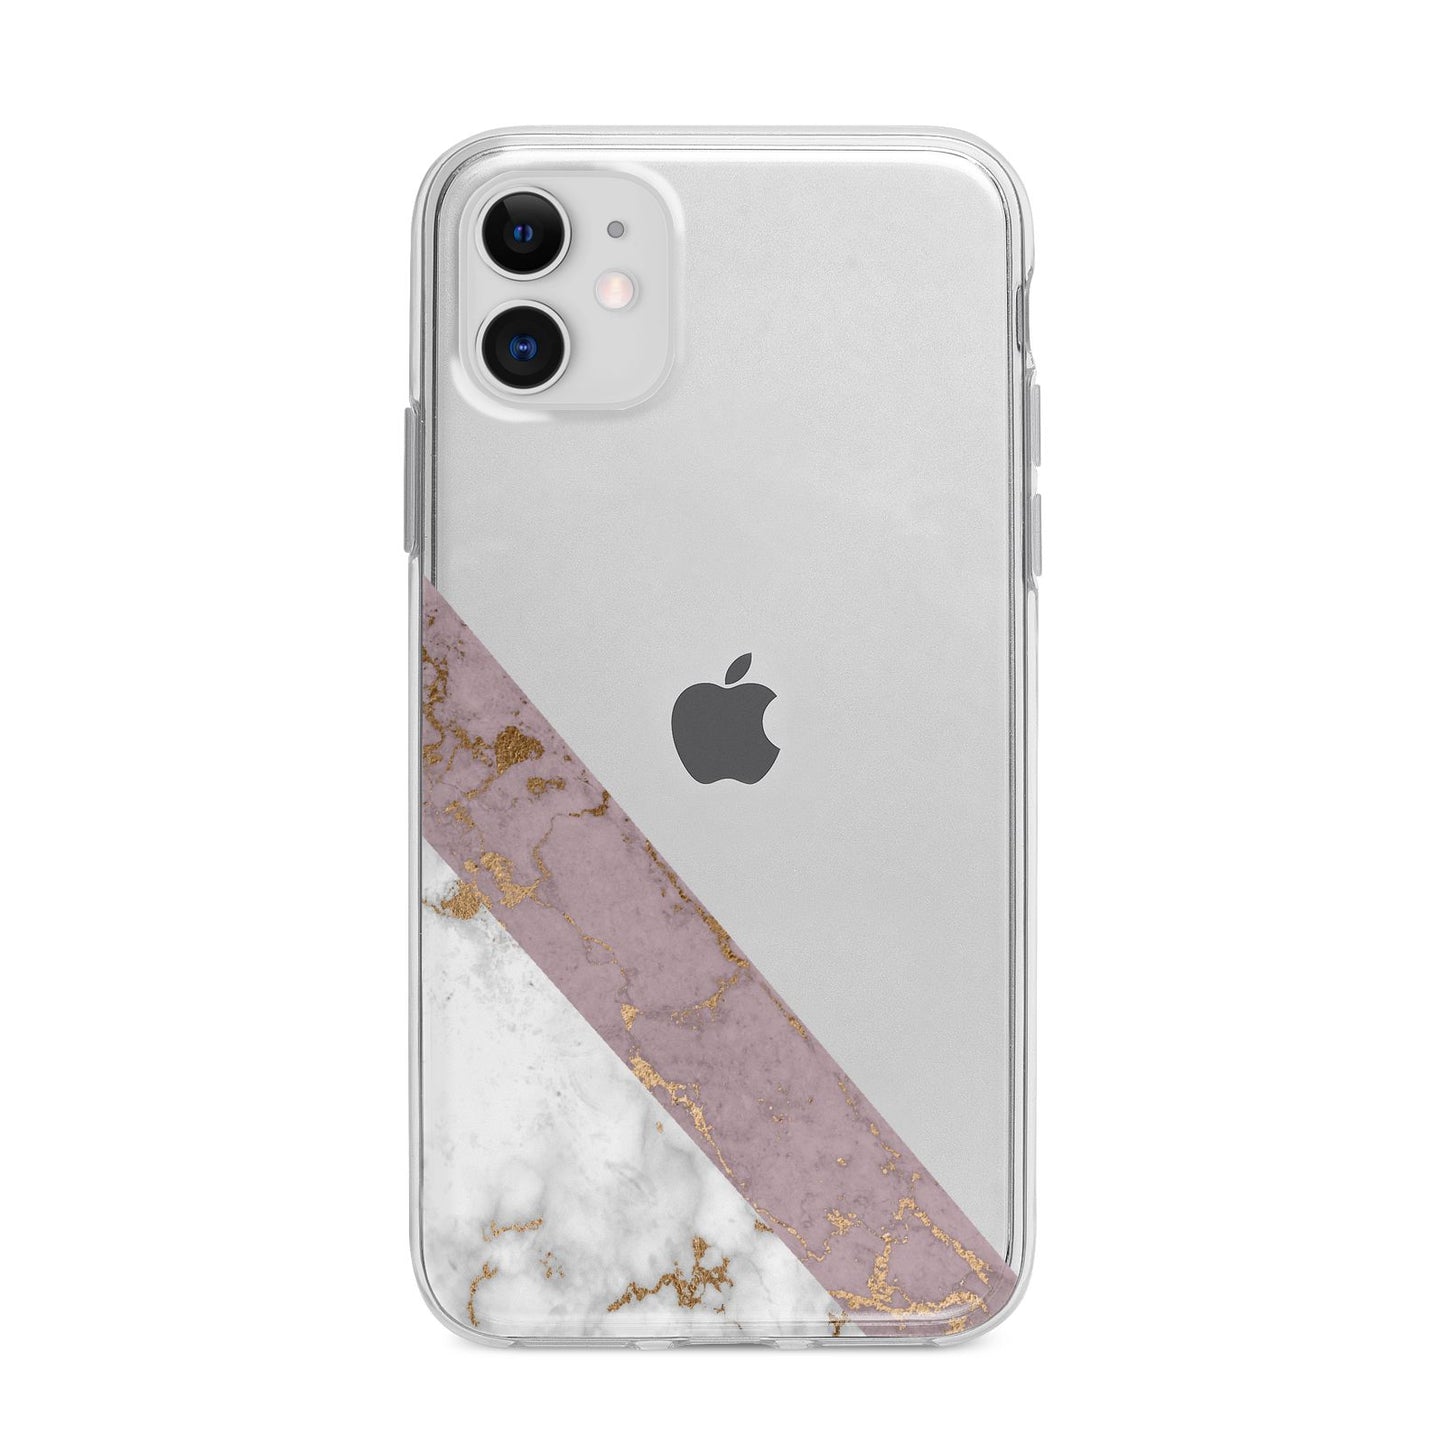 Transparent Pink and White Marble Apple iPhone 11 in White with Bumper Case